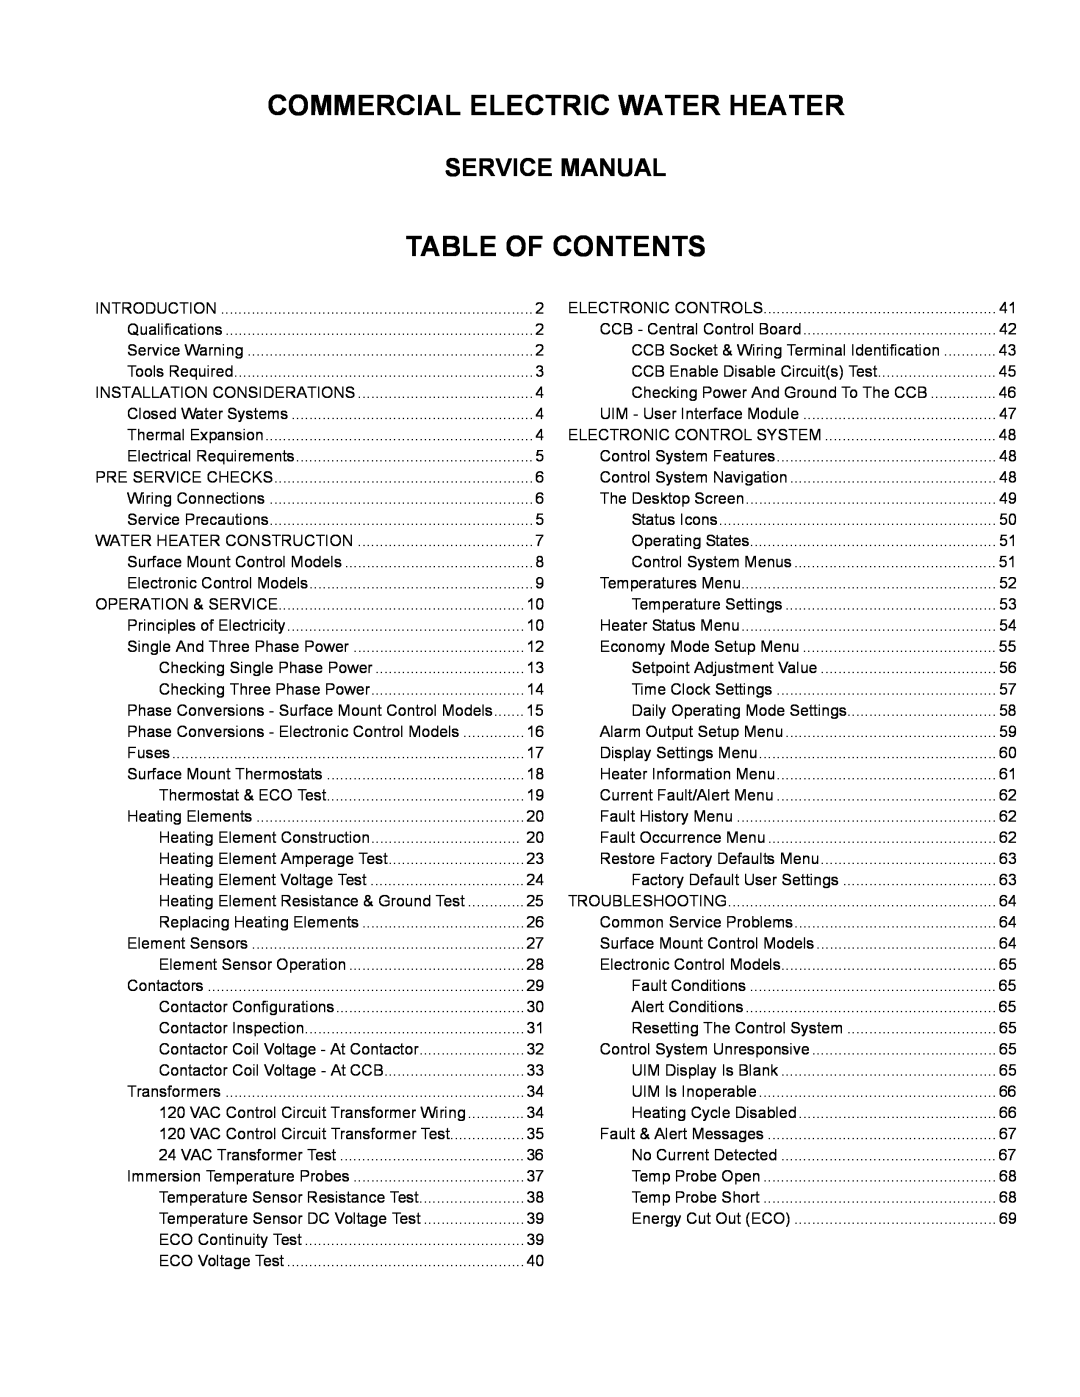 American Water Heater STCE3-52/80/119, ITCE3-52/80/119 Commercial Electric Water Heater, Table Of Contents, Service Manual 